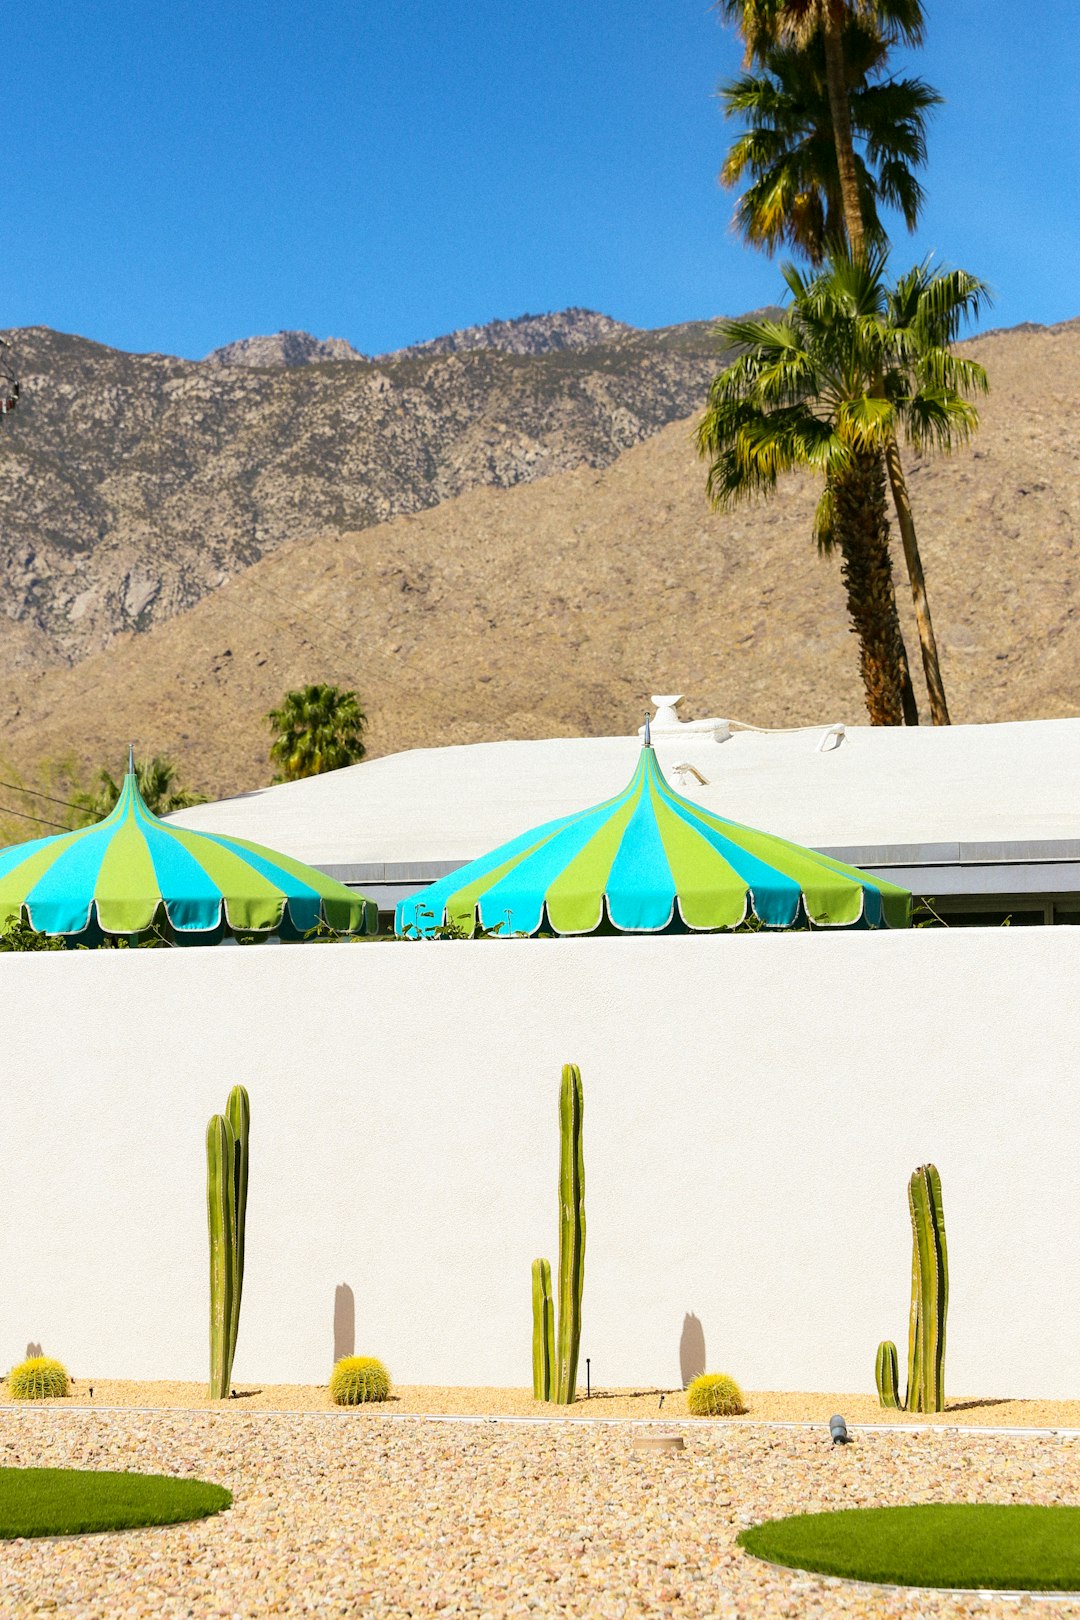 green palm trees near white and blue beach umbrellas during daytime